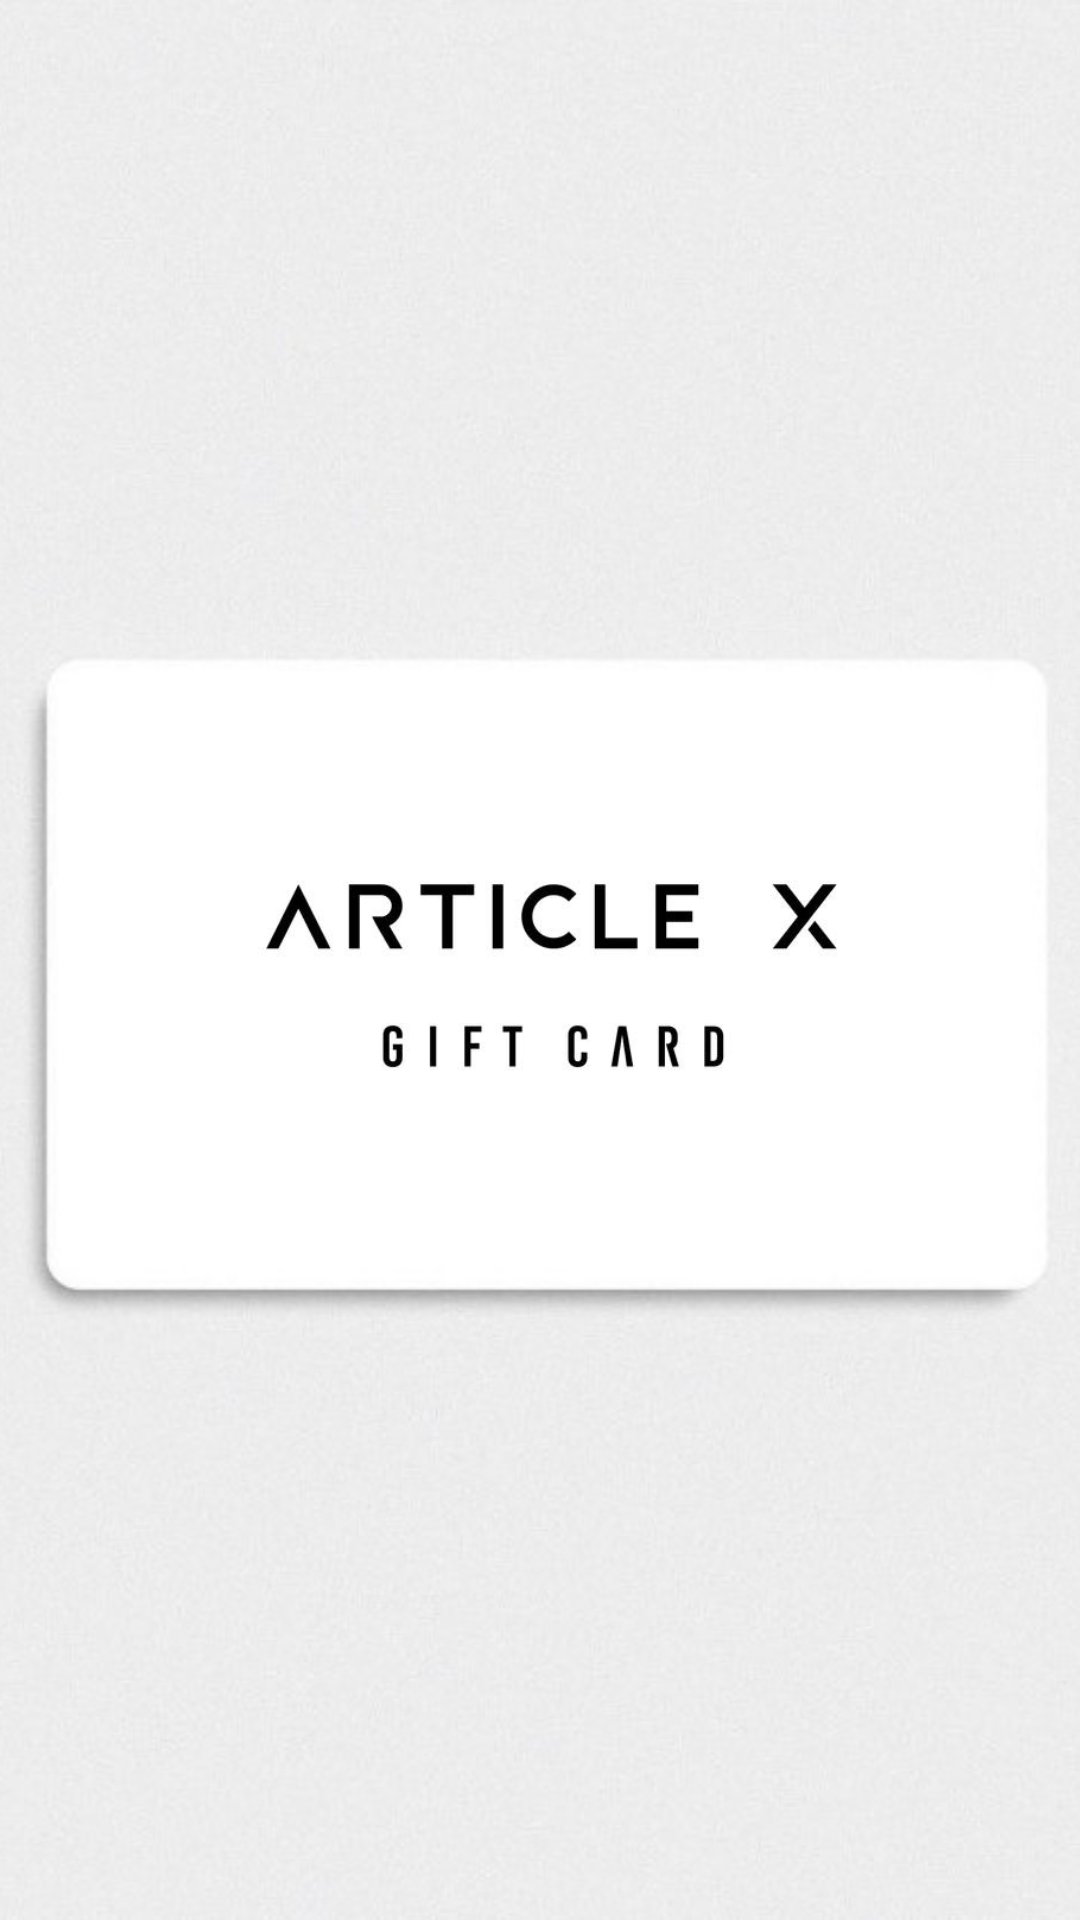 The Article X Gift Card